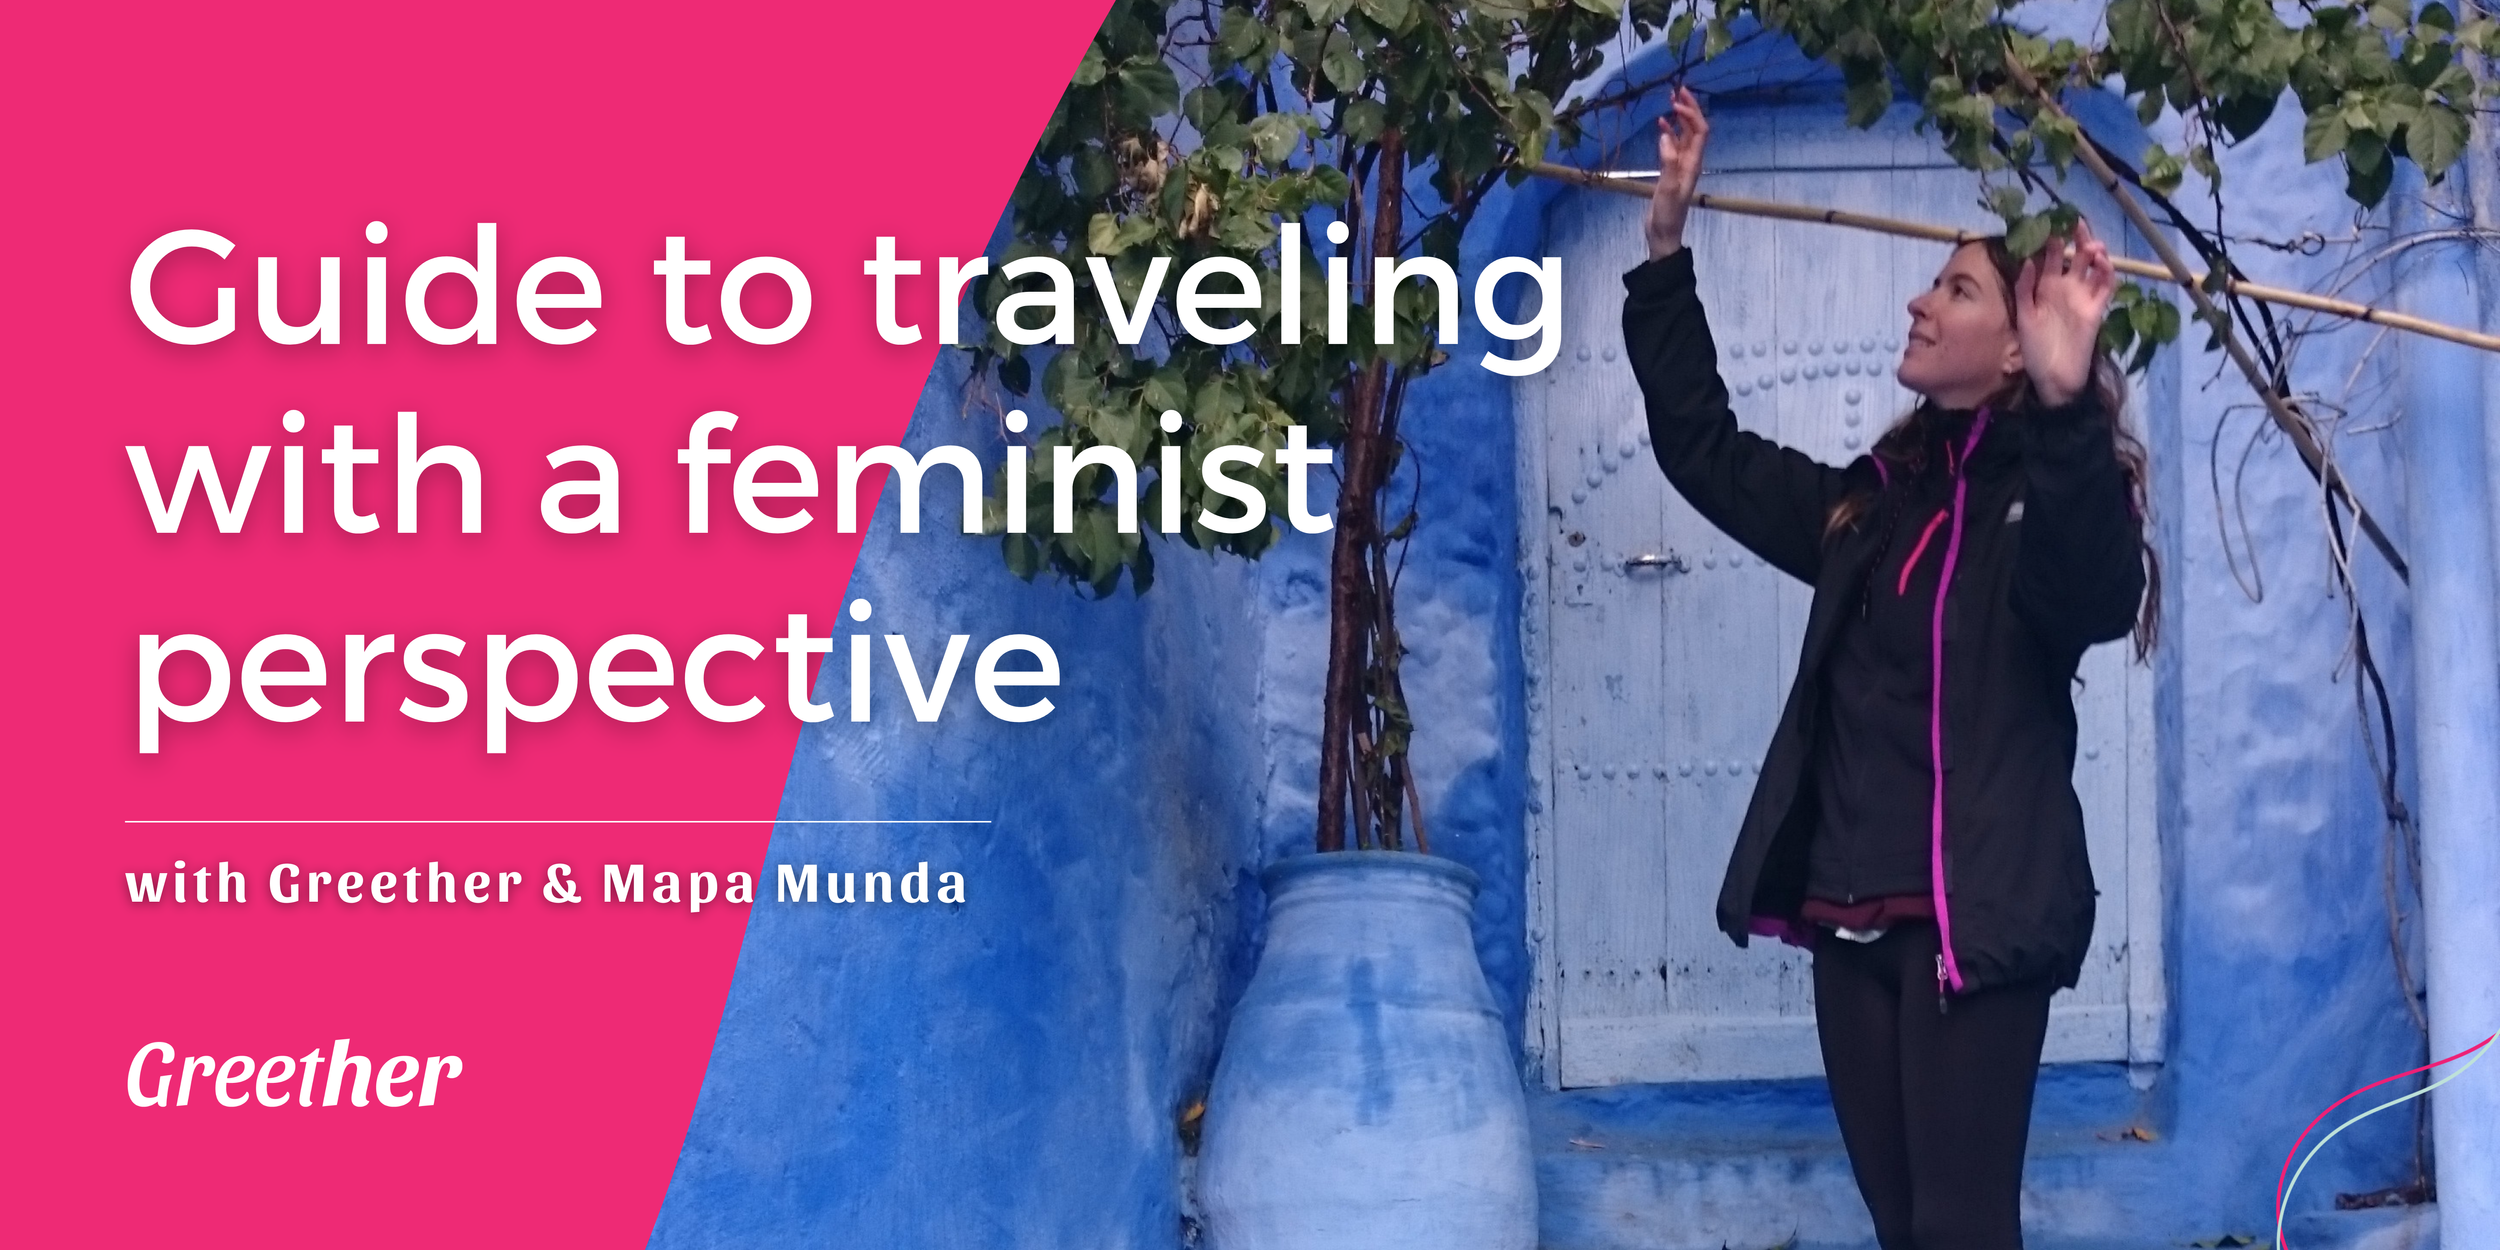 Ariana Bastos in Morocco, Guide to traveling with a feminist perspective